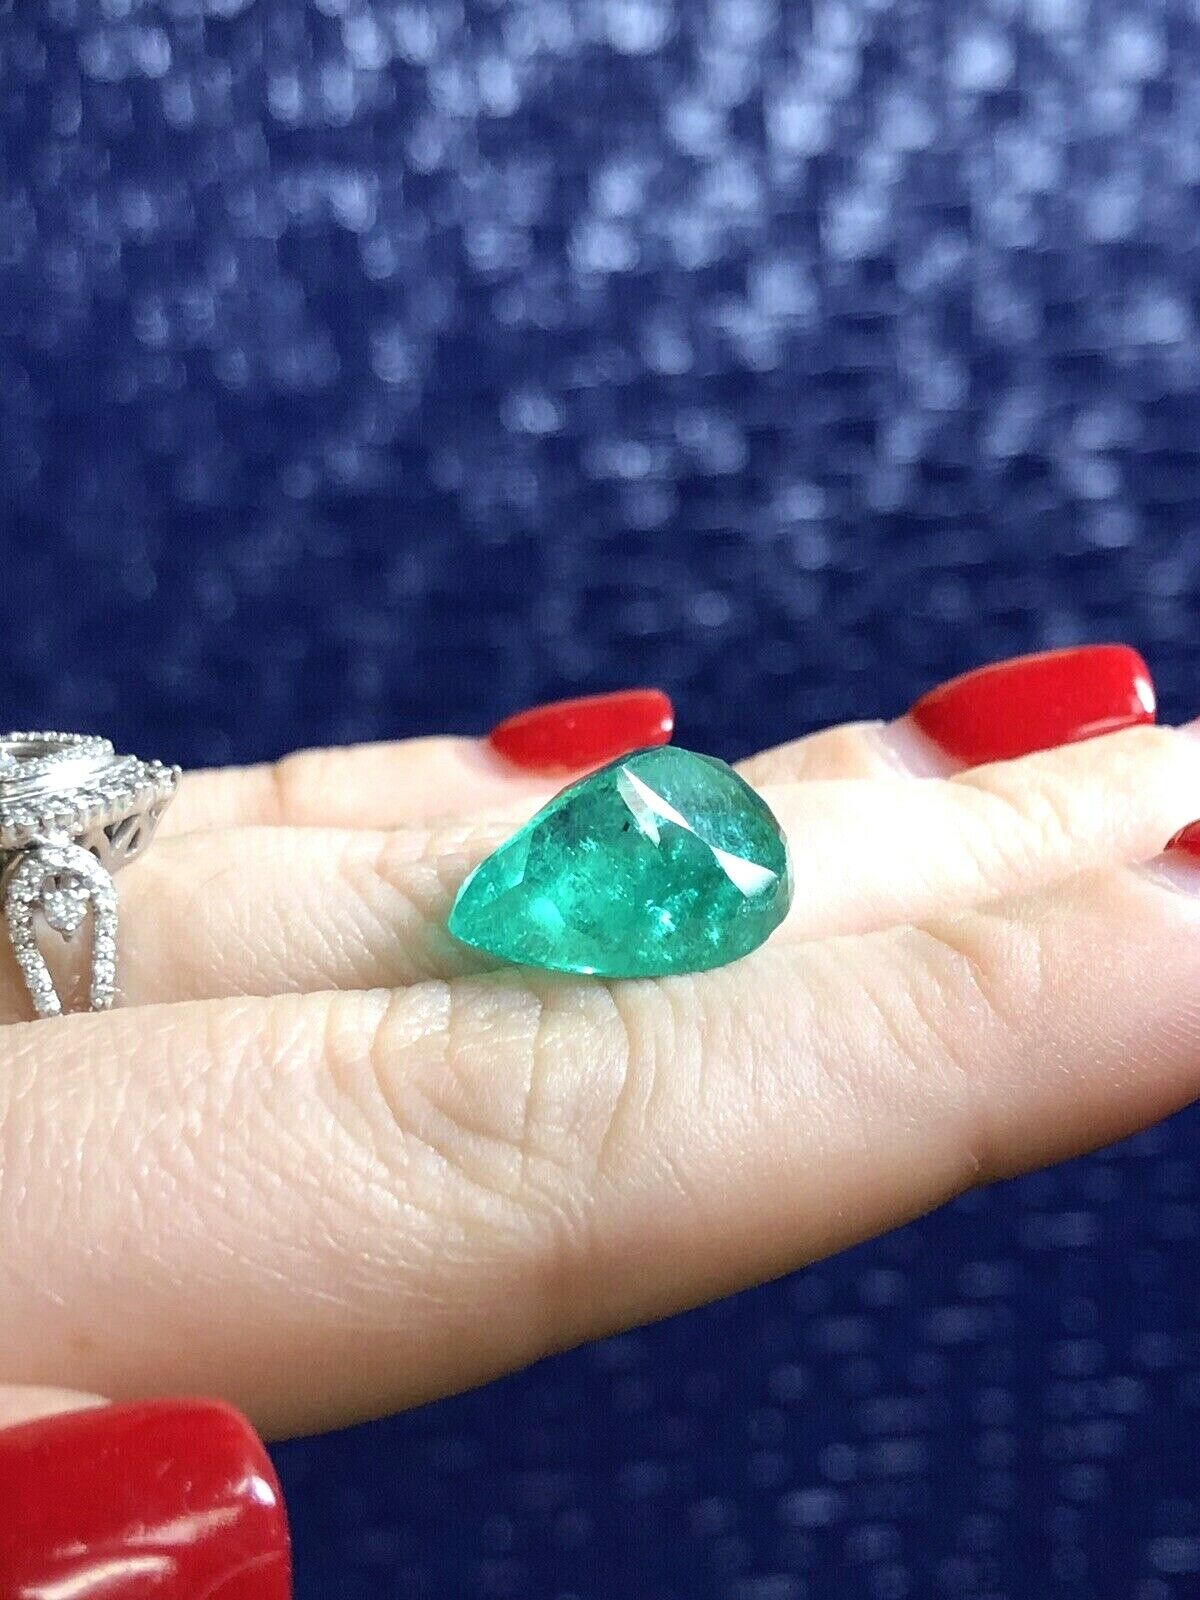 10.59CT Pear Colombian Emerald GIA Certified